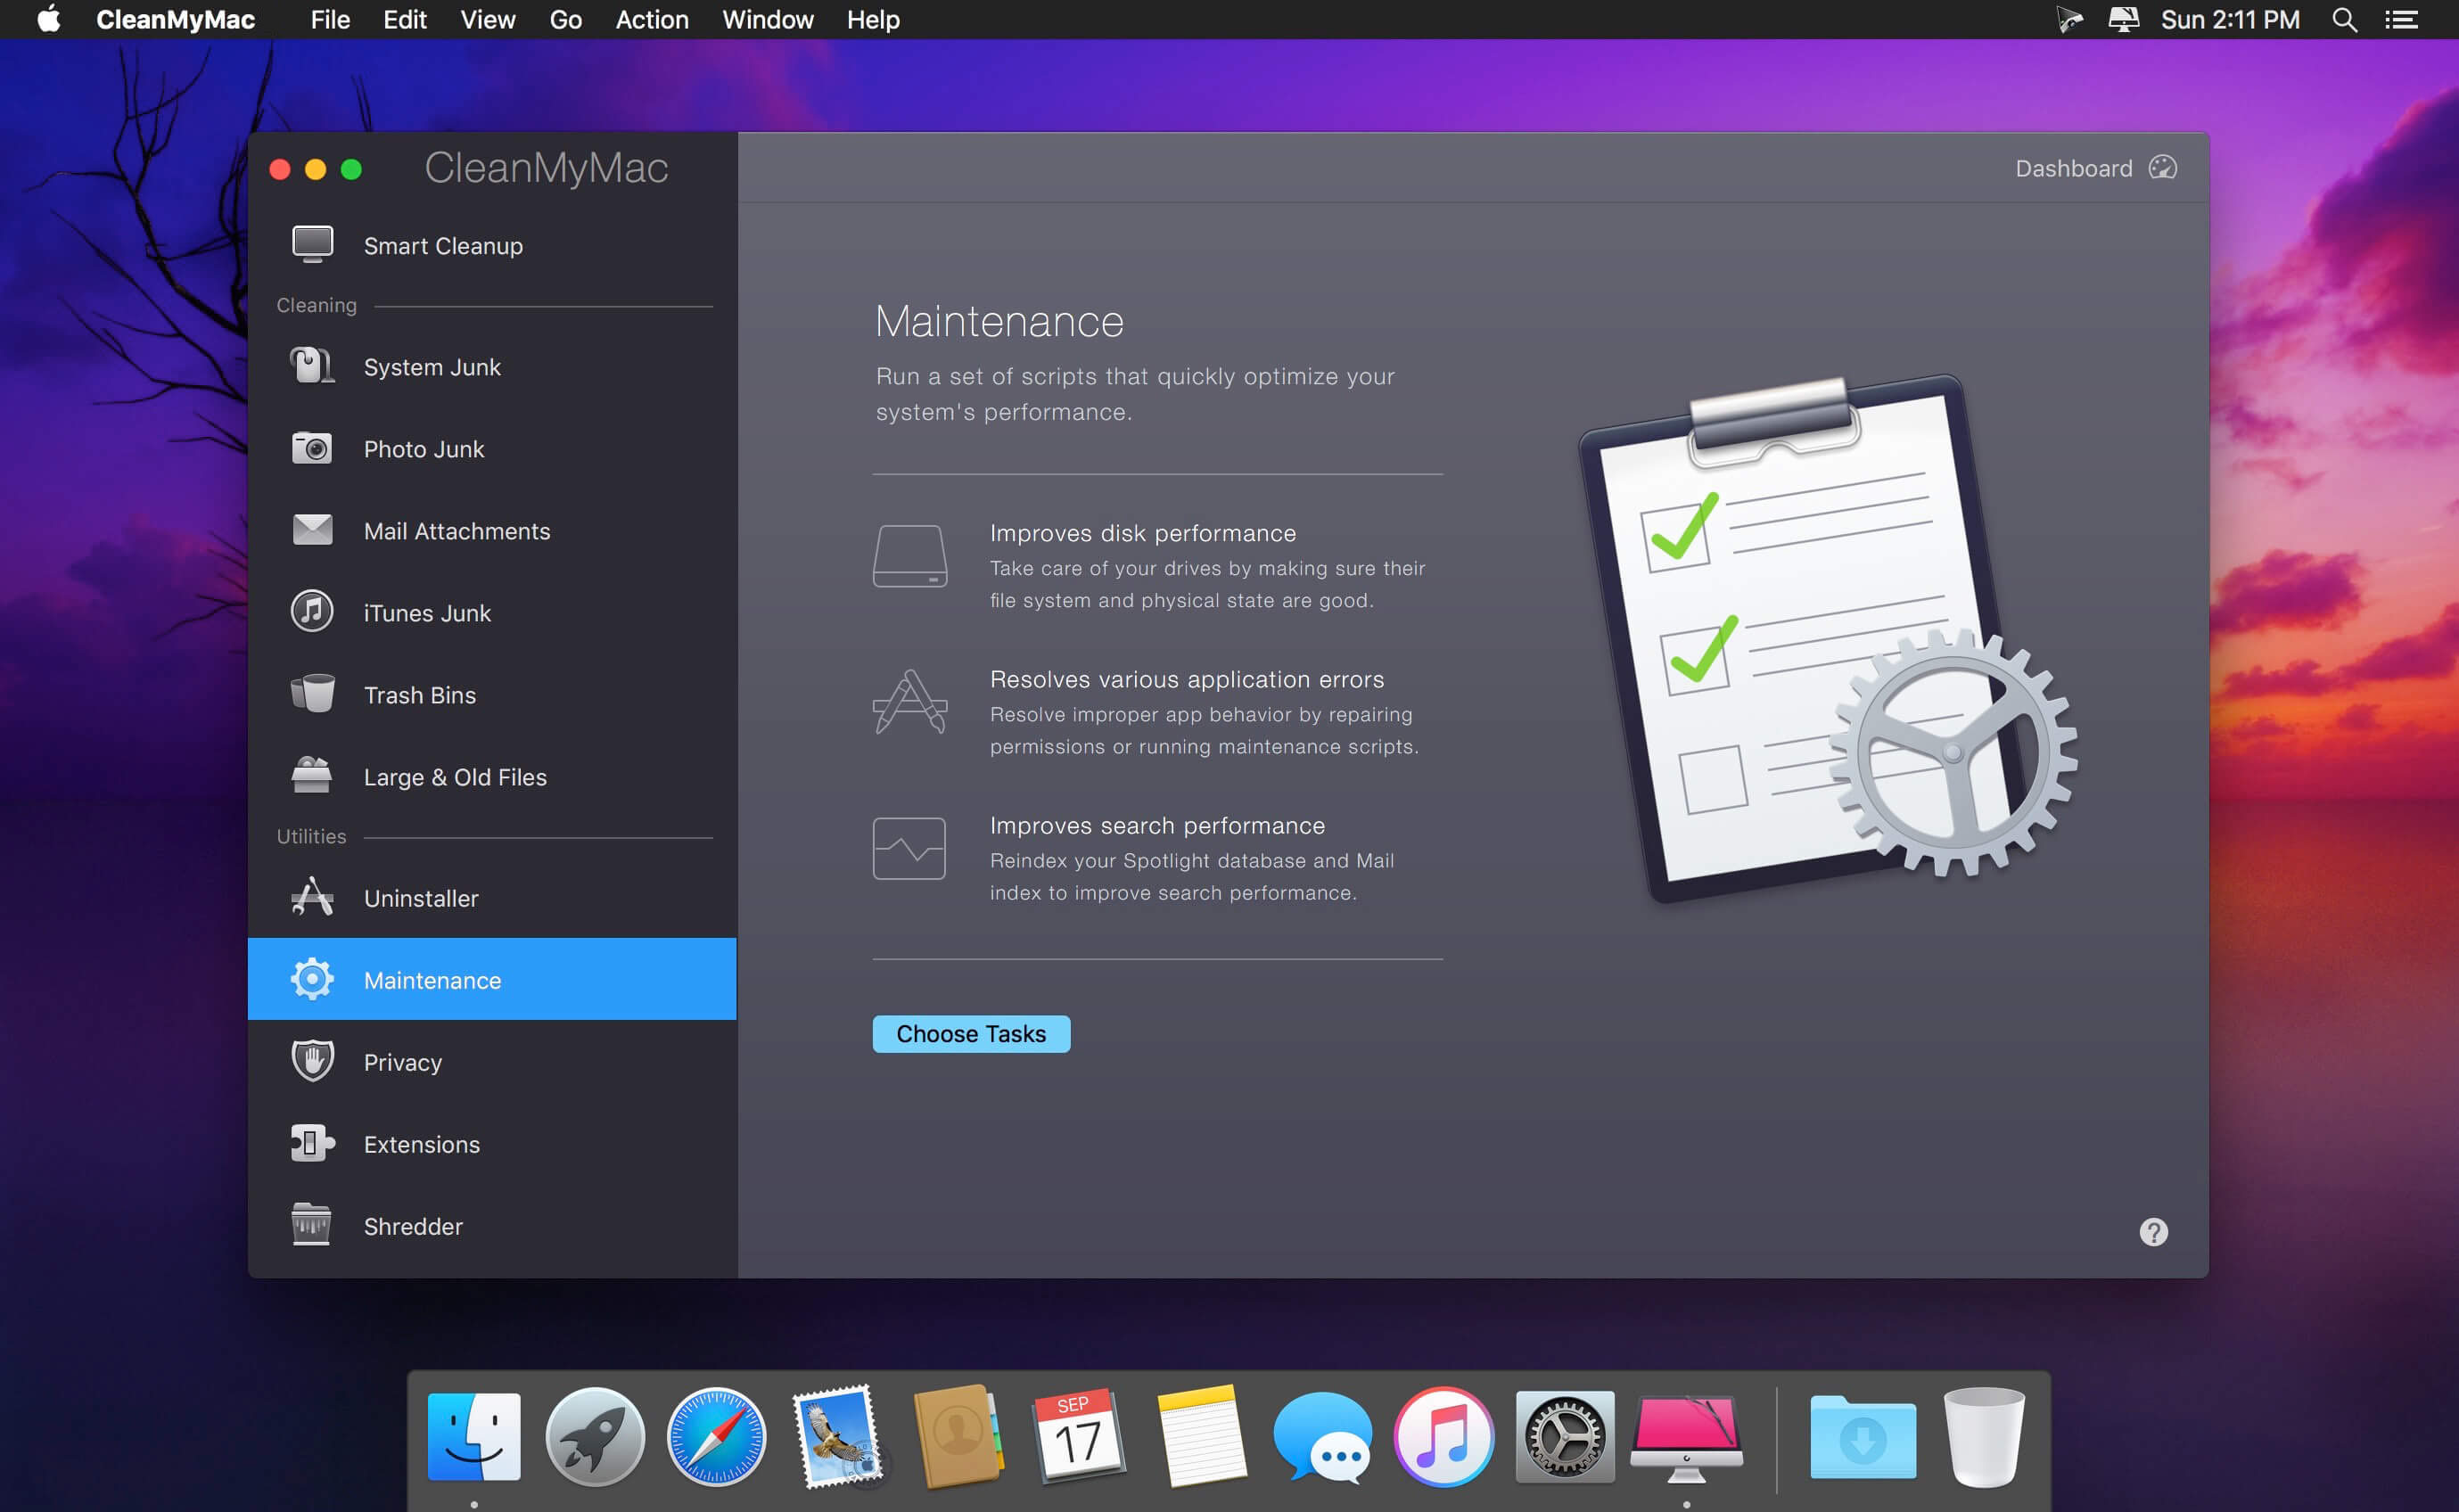 vpnsecure for mac os 10.7.5